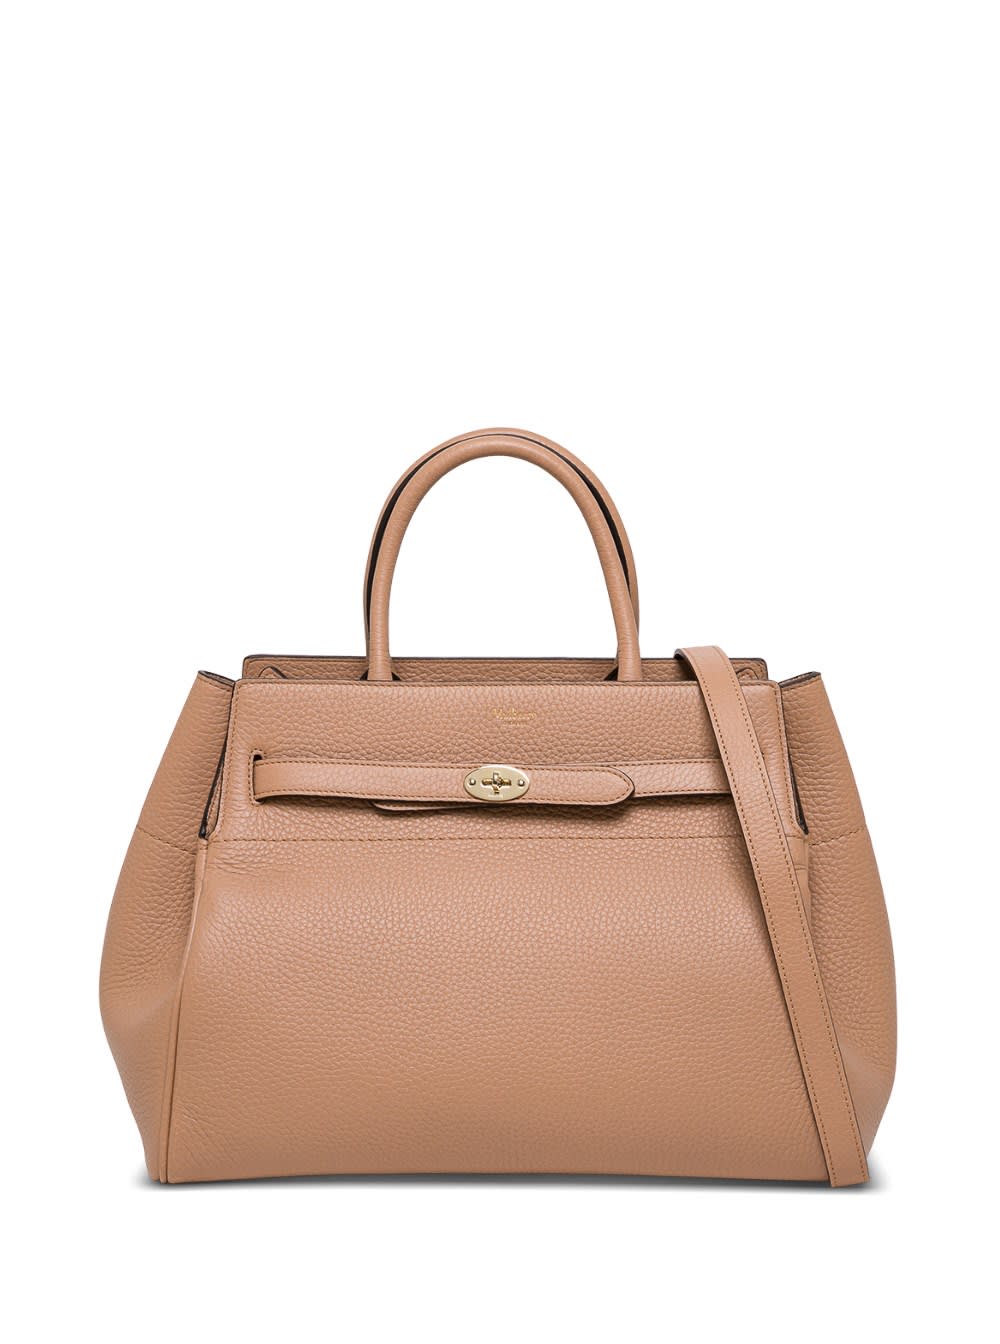 Mulberry BAYSWATER HEAVY HANDBAG IN PINK LEATHER